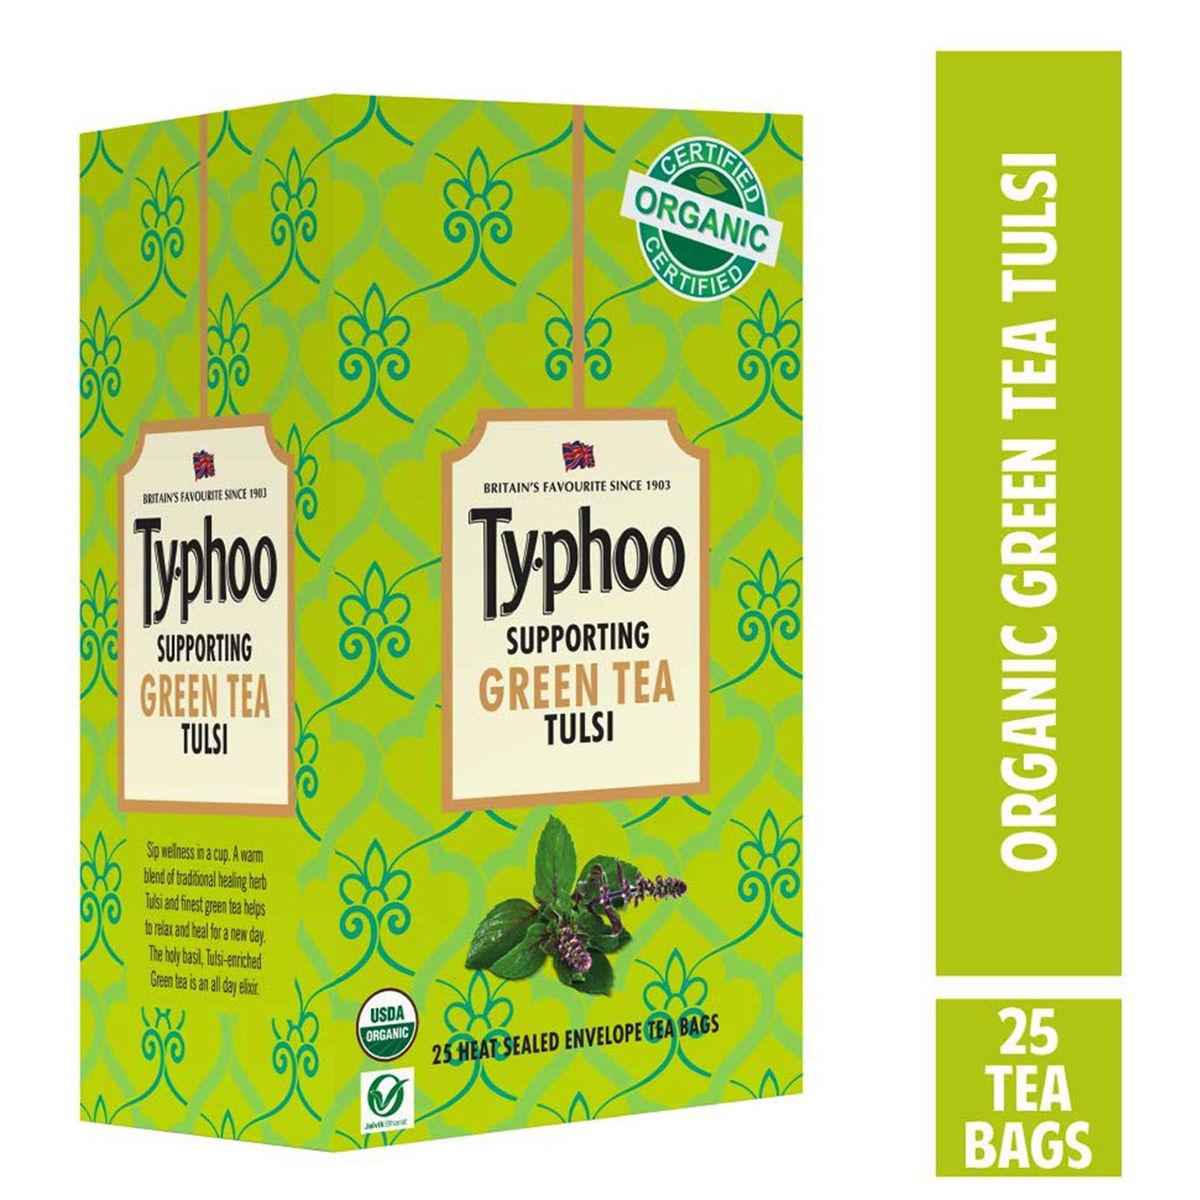 Buy Ty.phoo Supporting Green Tea Tulsi Bags, 25 Count Online